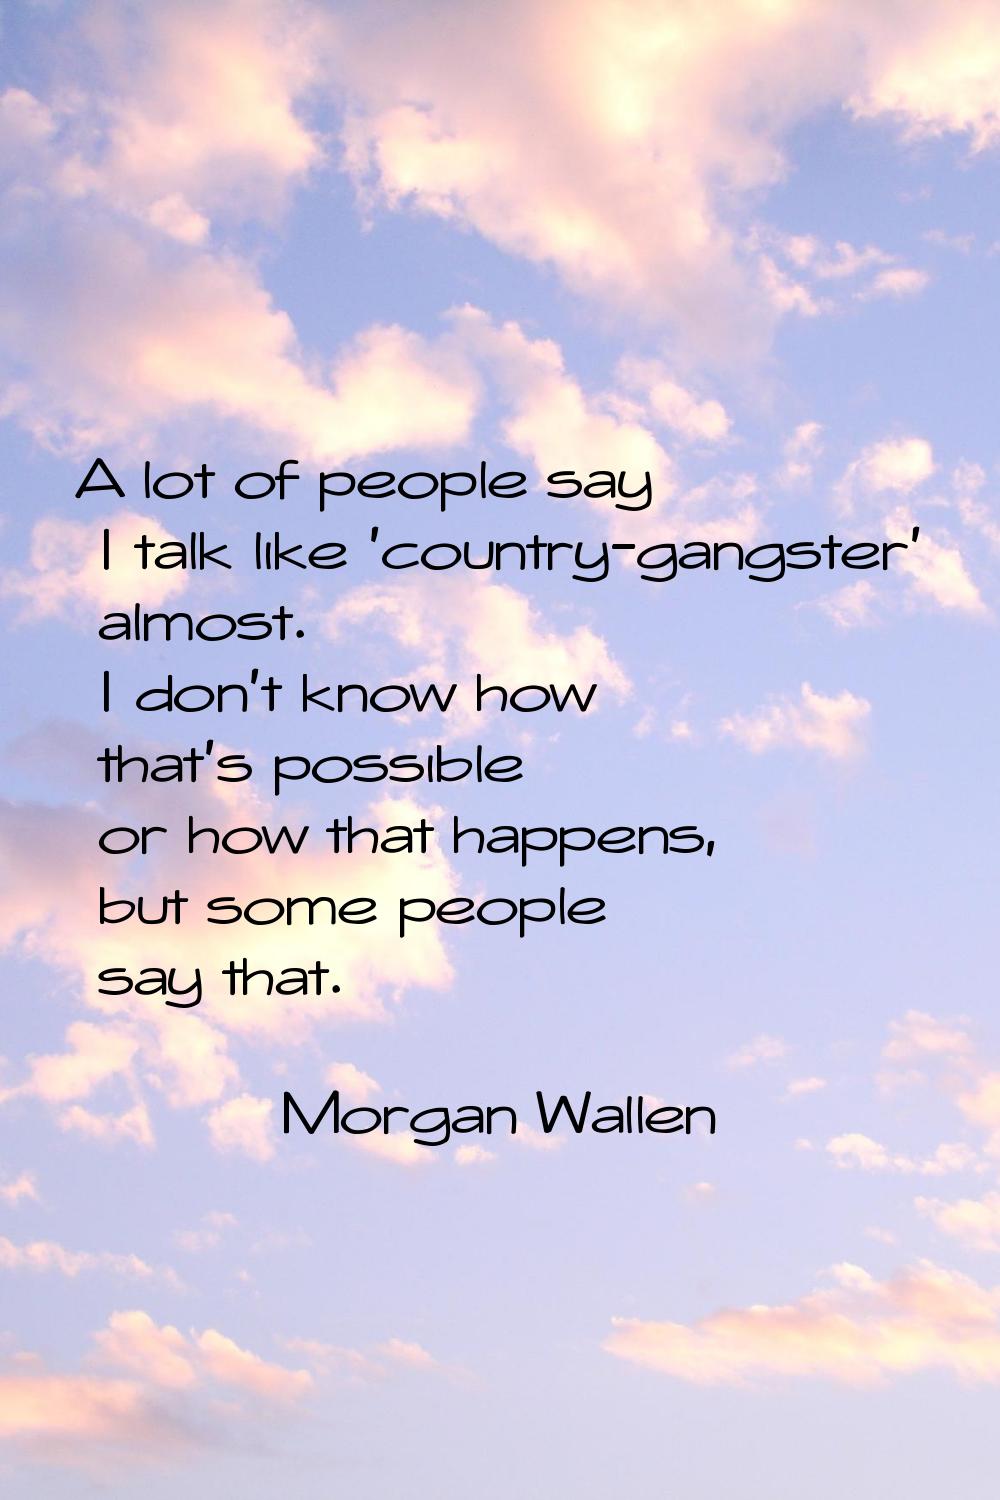 A lot of people say I talk like 'country-gangster' almost. I don't know how that's possible or how 